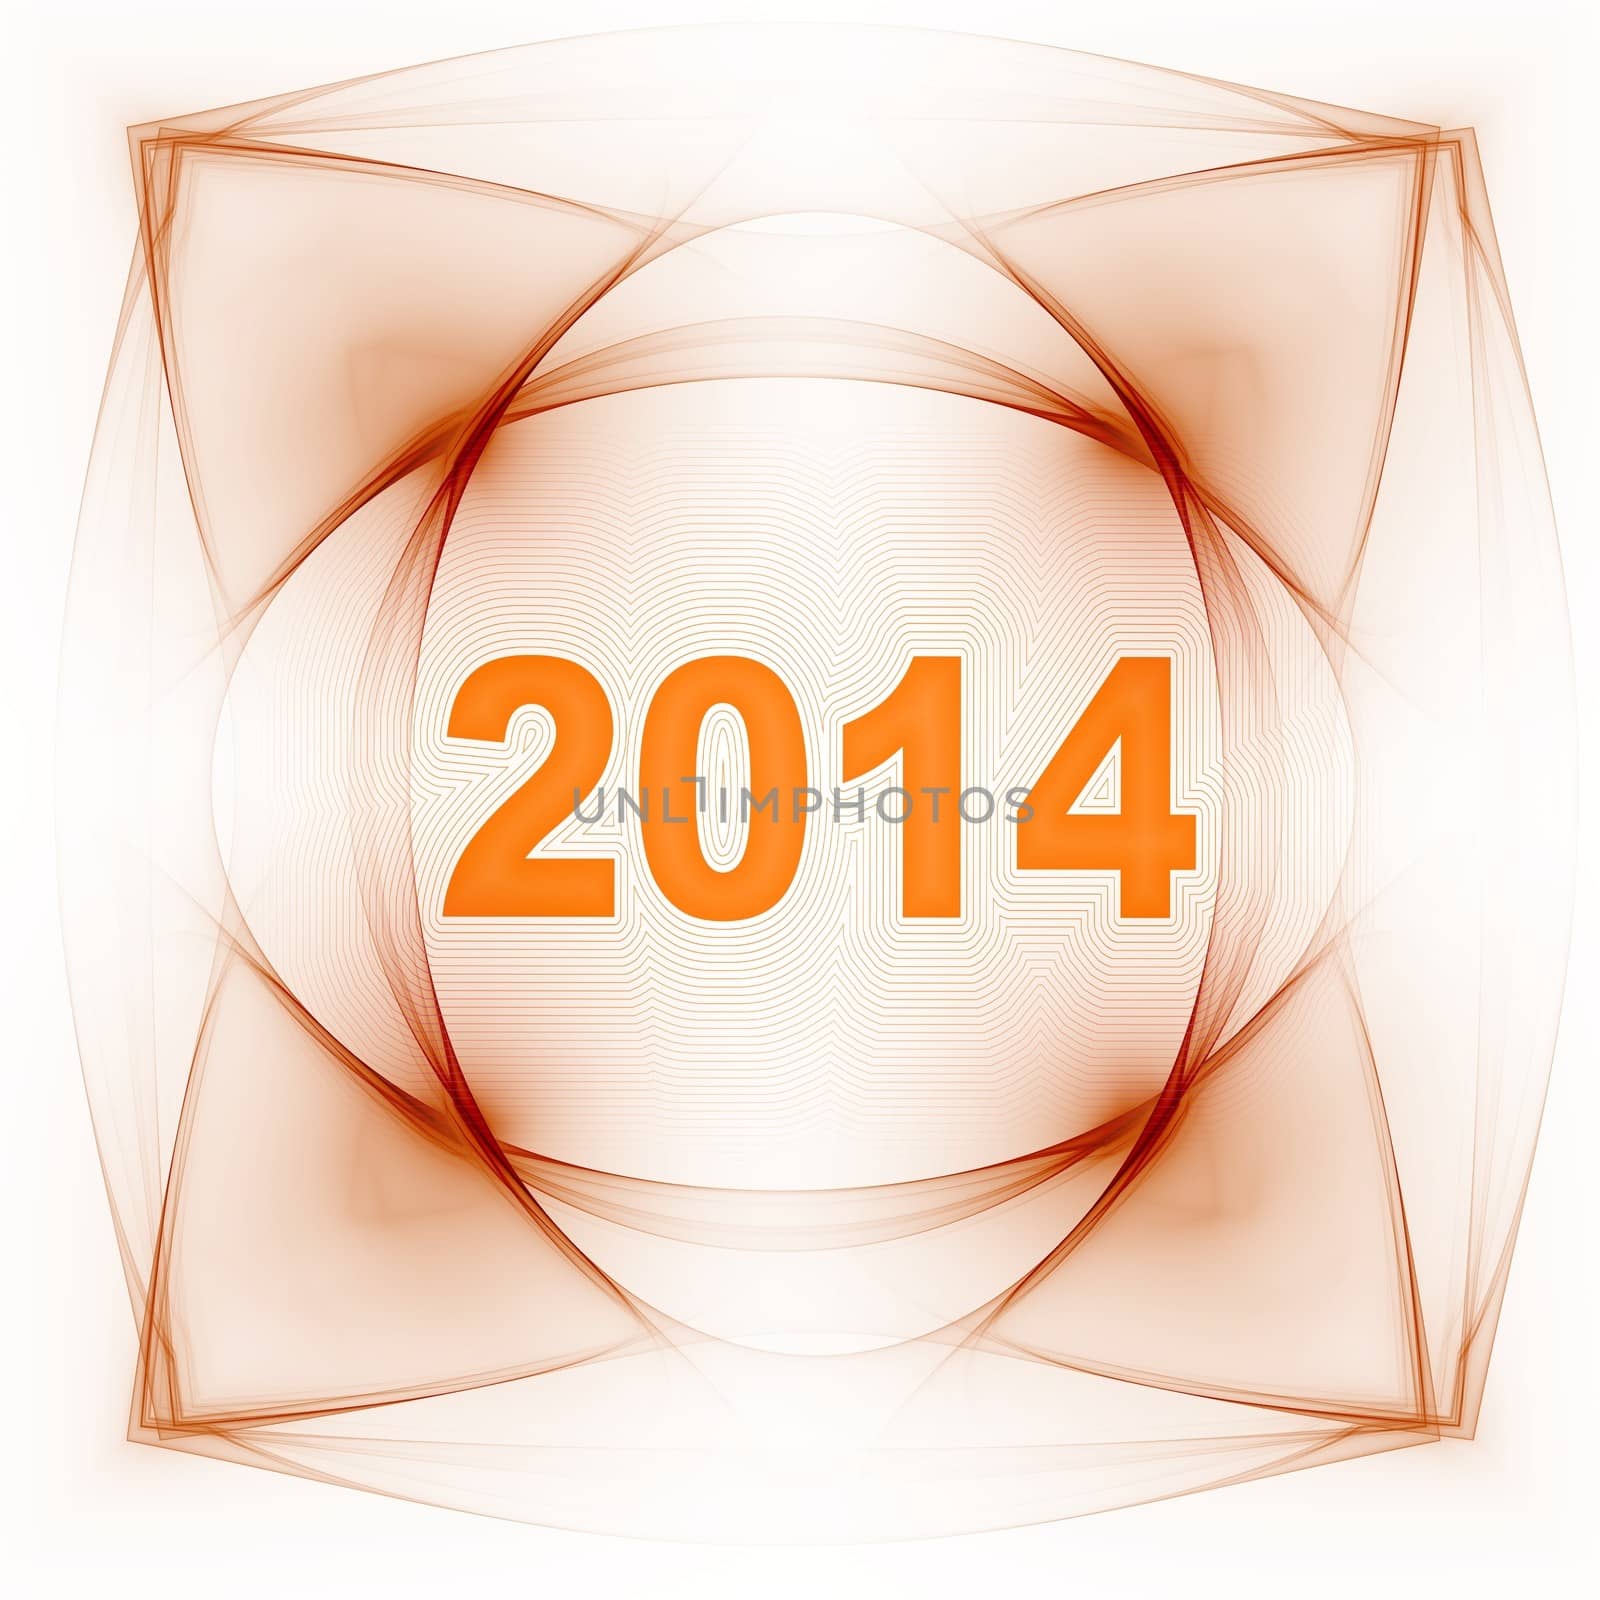  design of year 2014 with abstract background in brown color